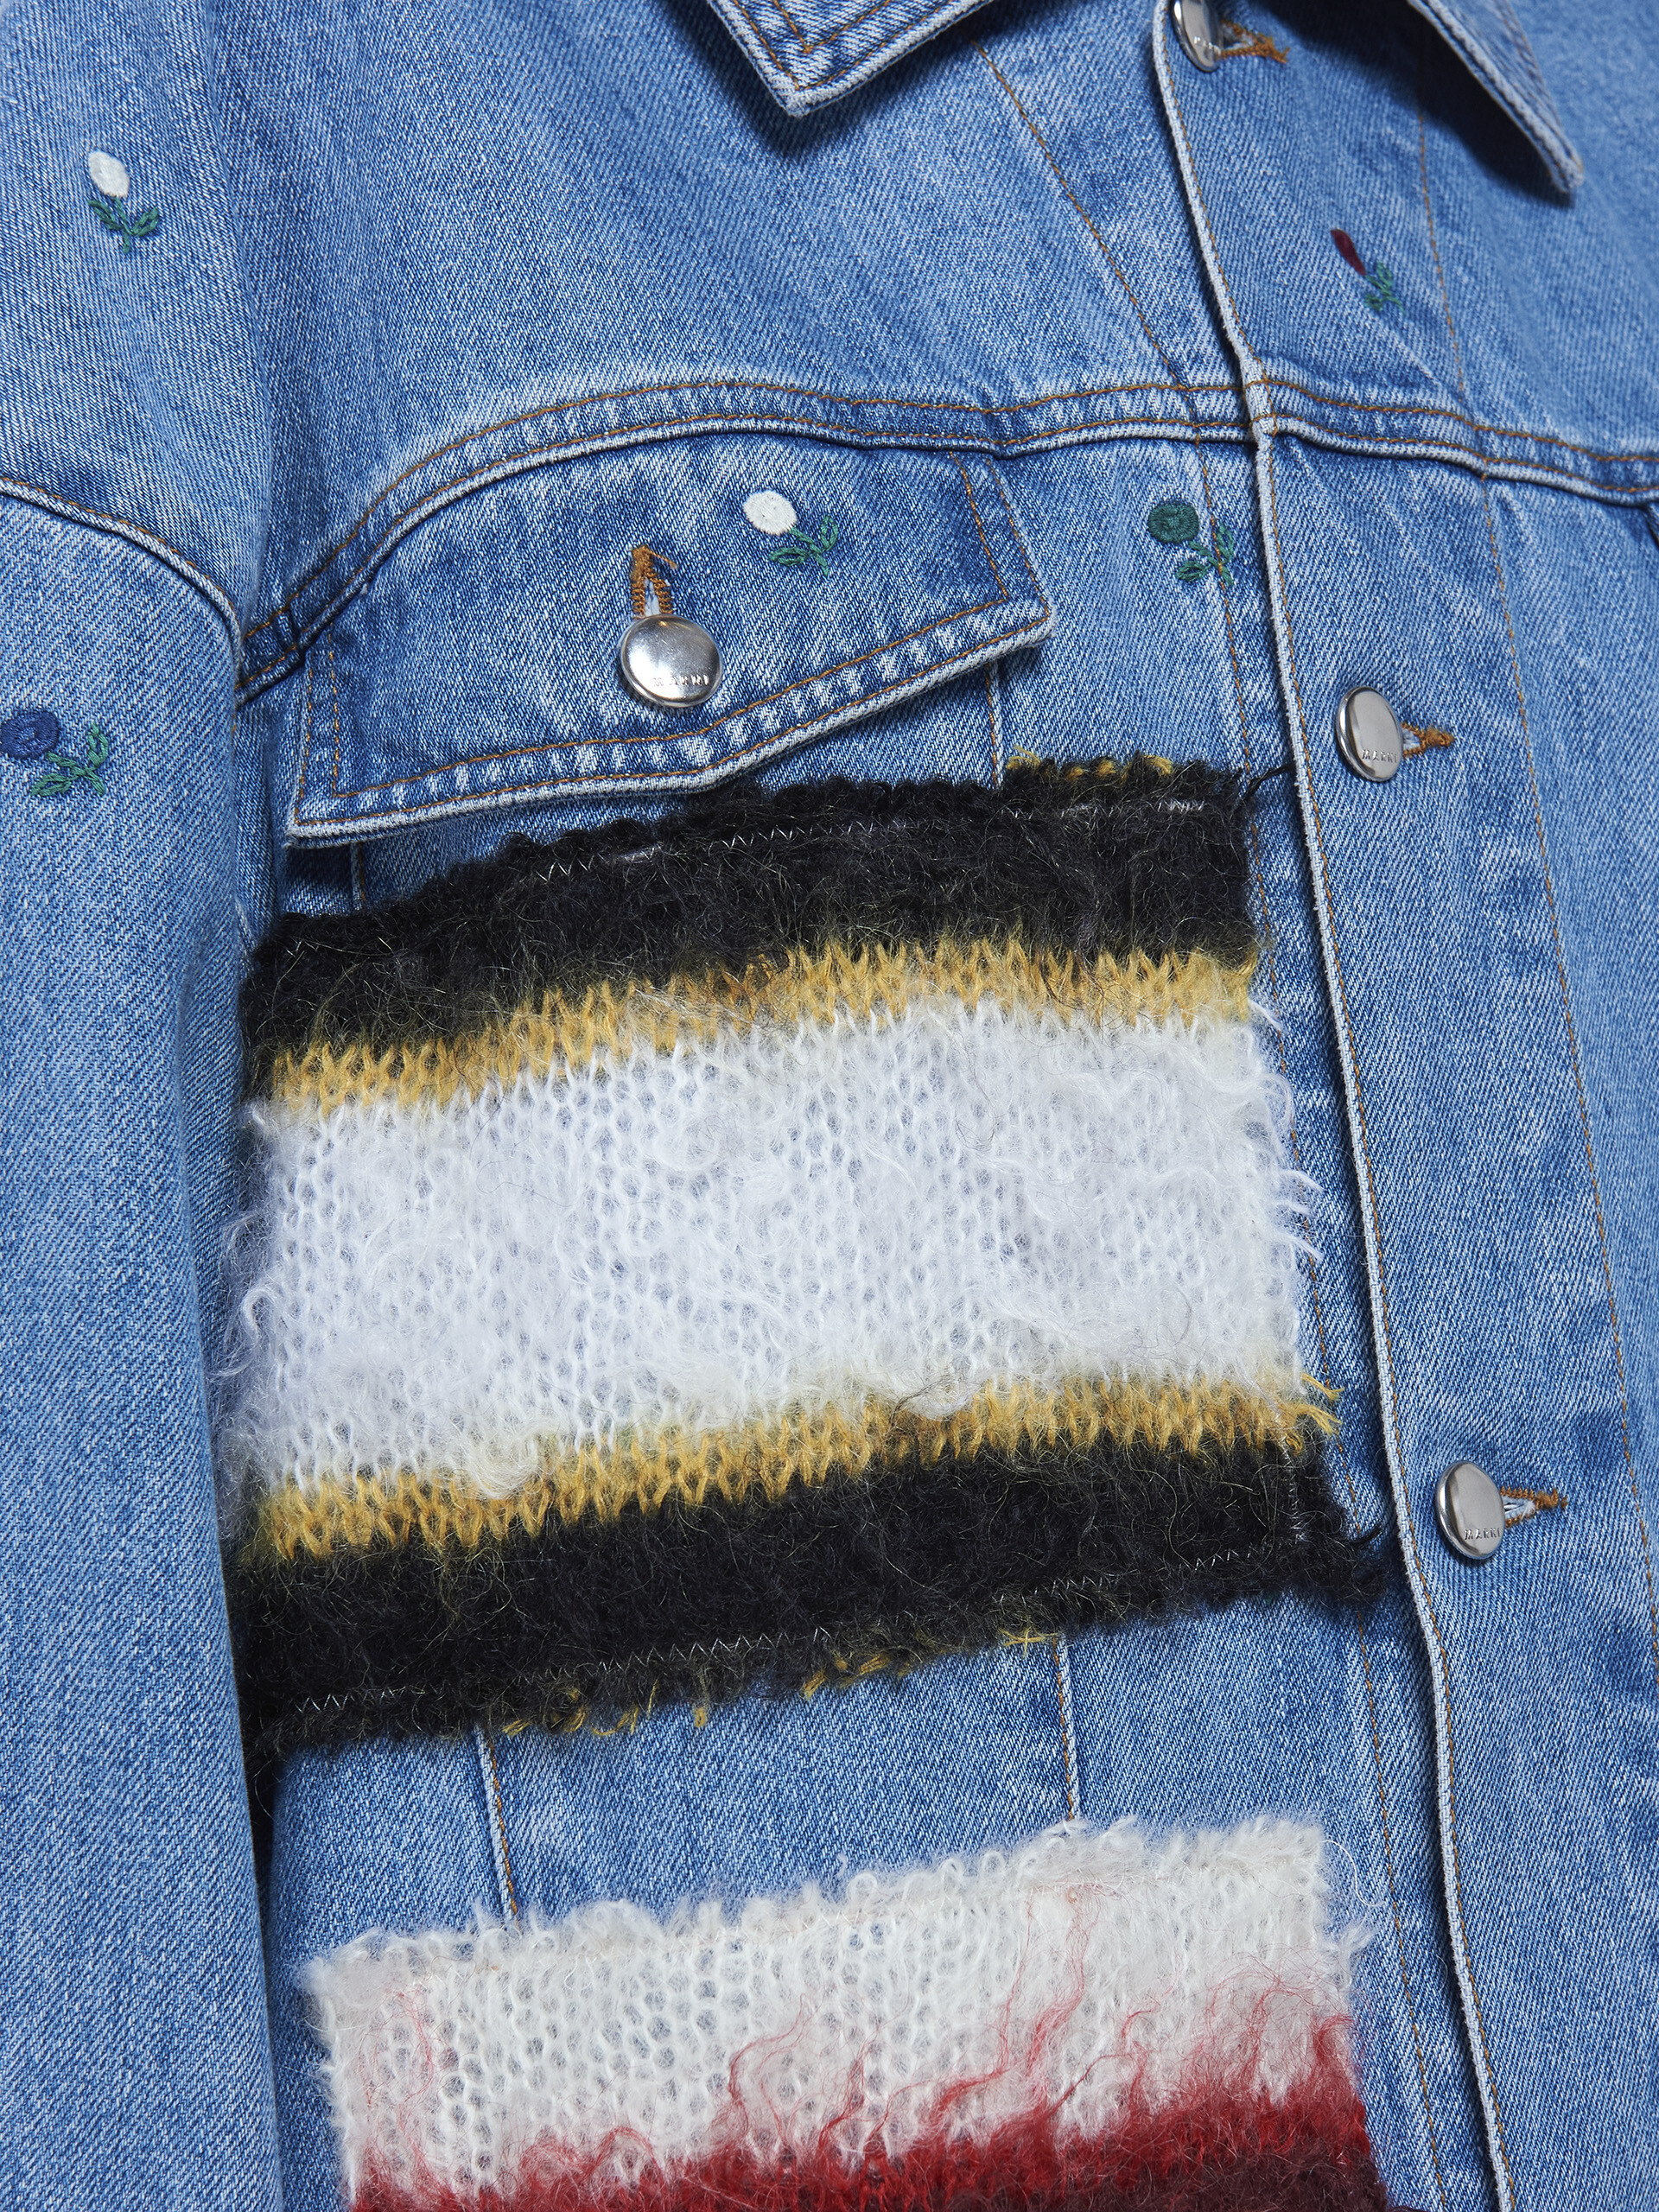 Mohair and denim jacket - Jackets - Image 5